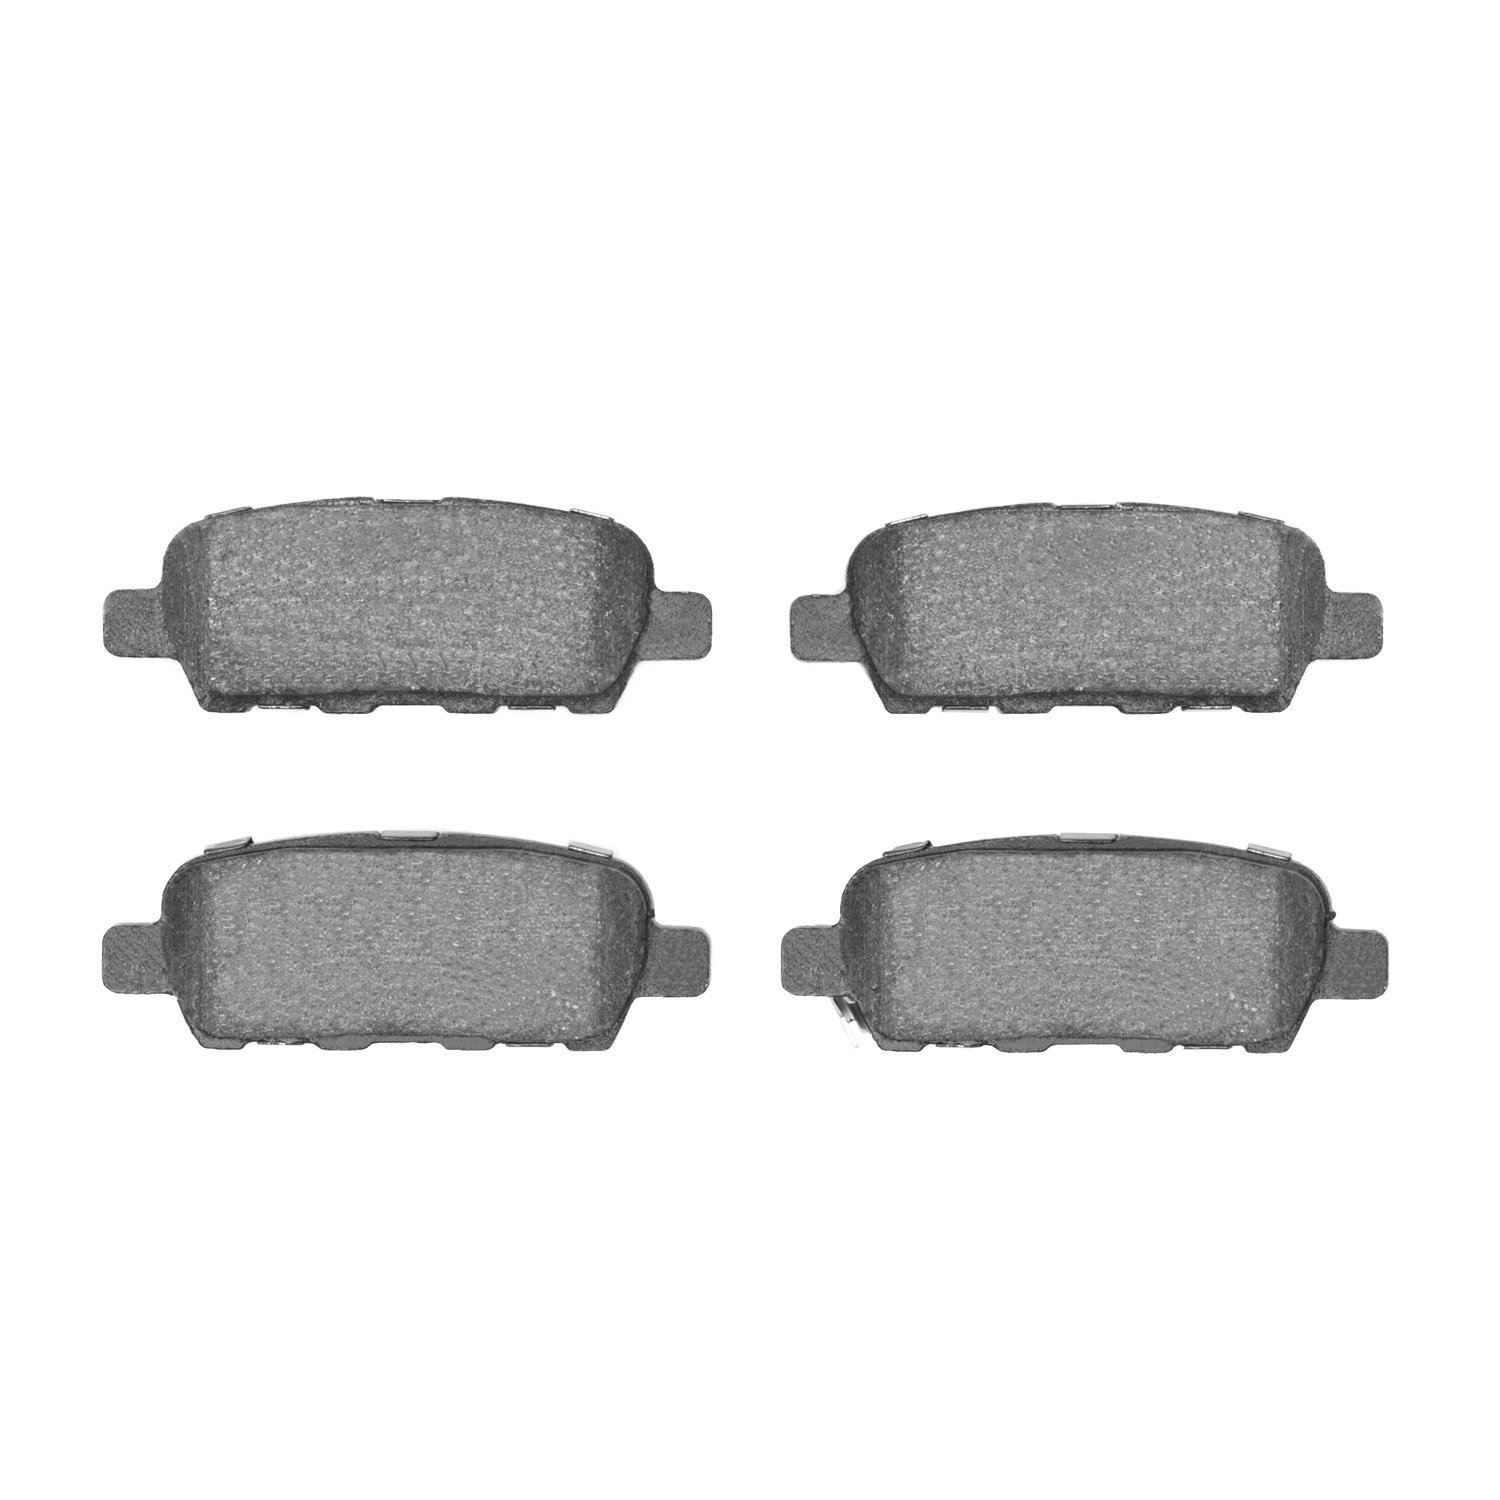 1115-0905-00 Active Performance Low-Metallic Brake Pads, Fits Select Multiple Makes/Models, Position: Rear